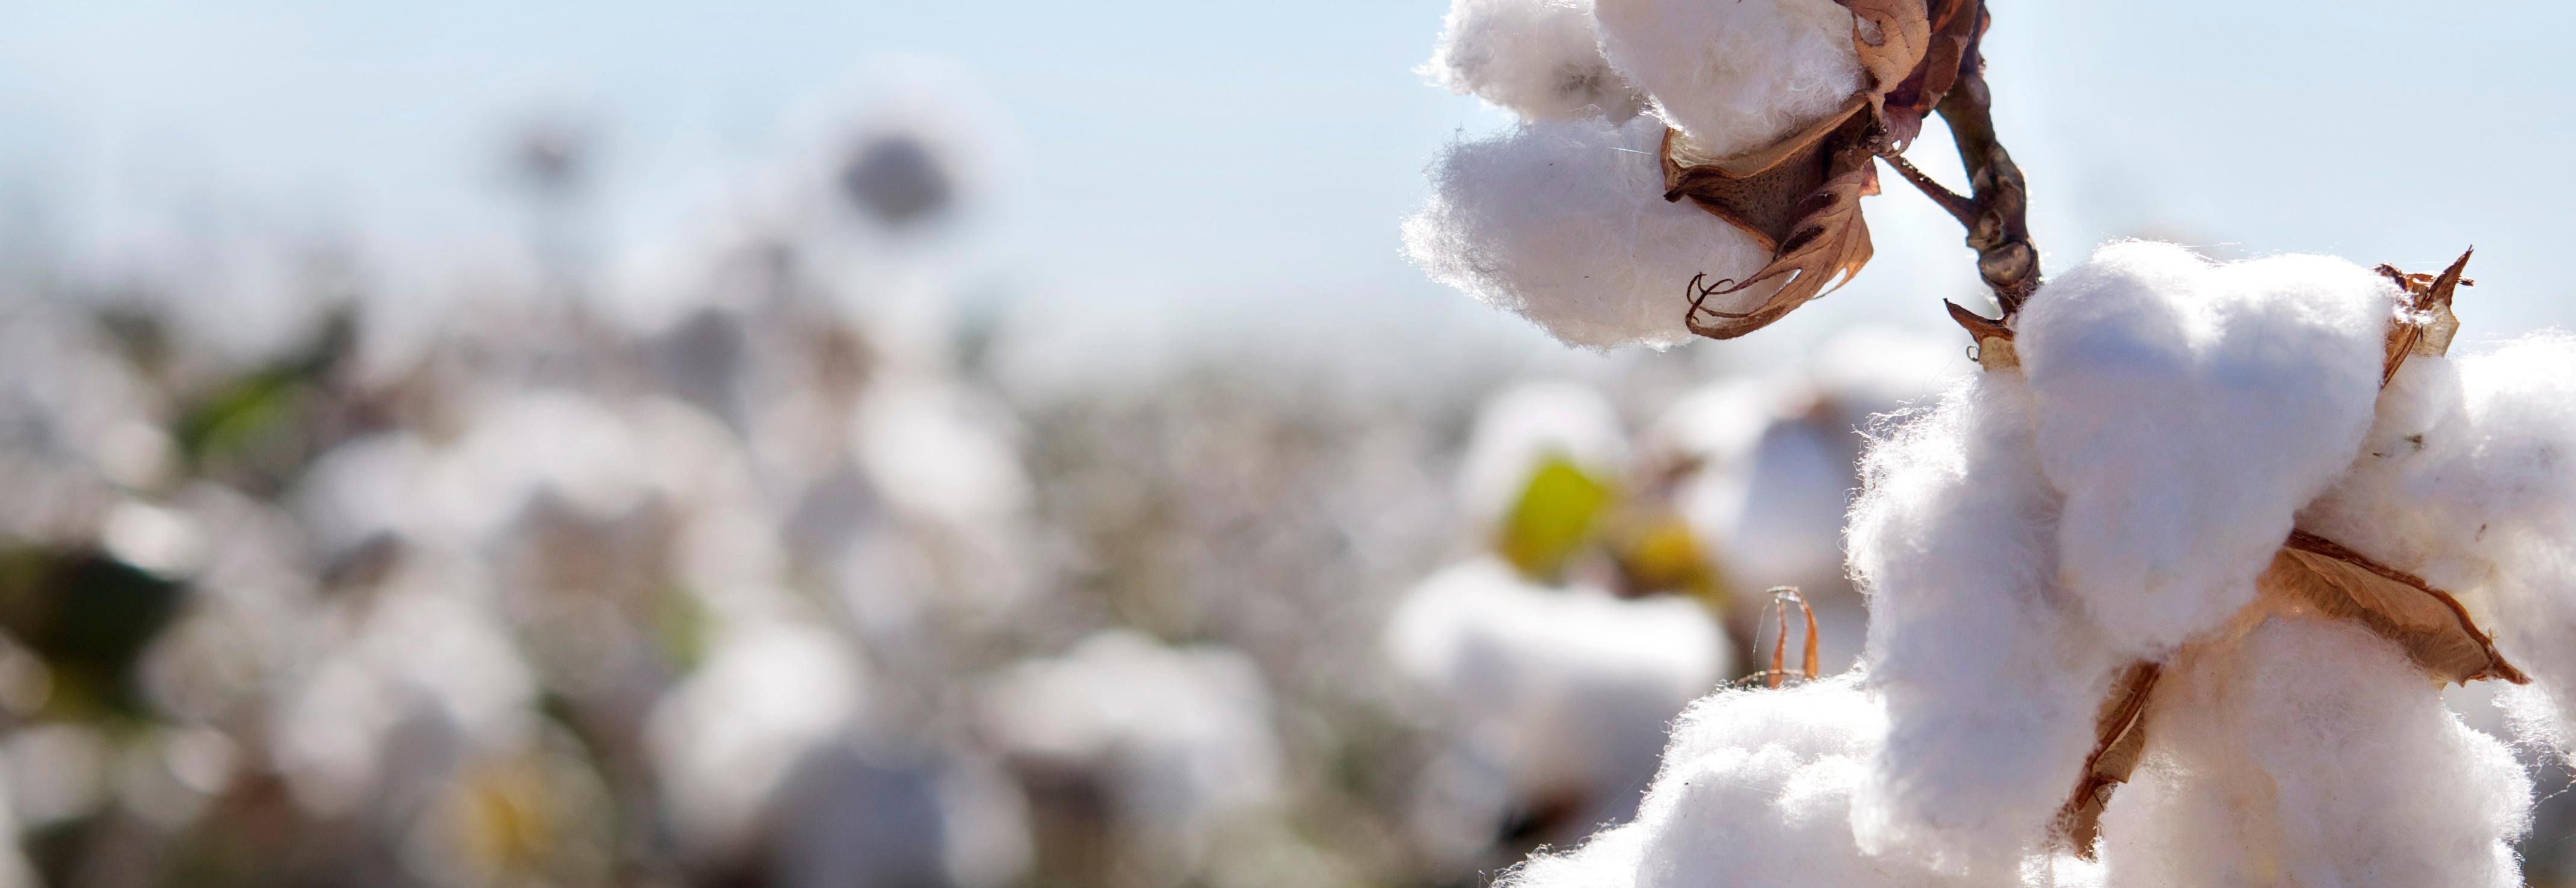 Cotton plant close up with others in background